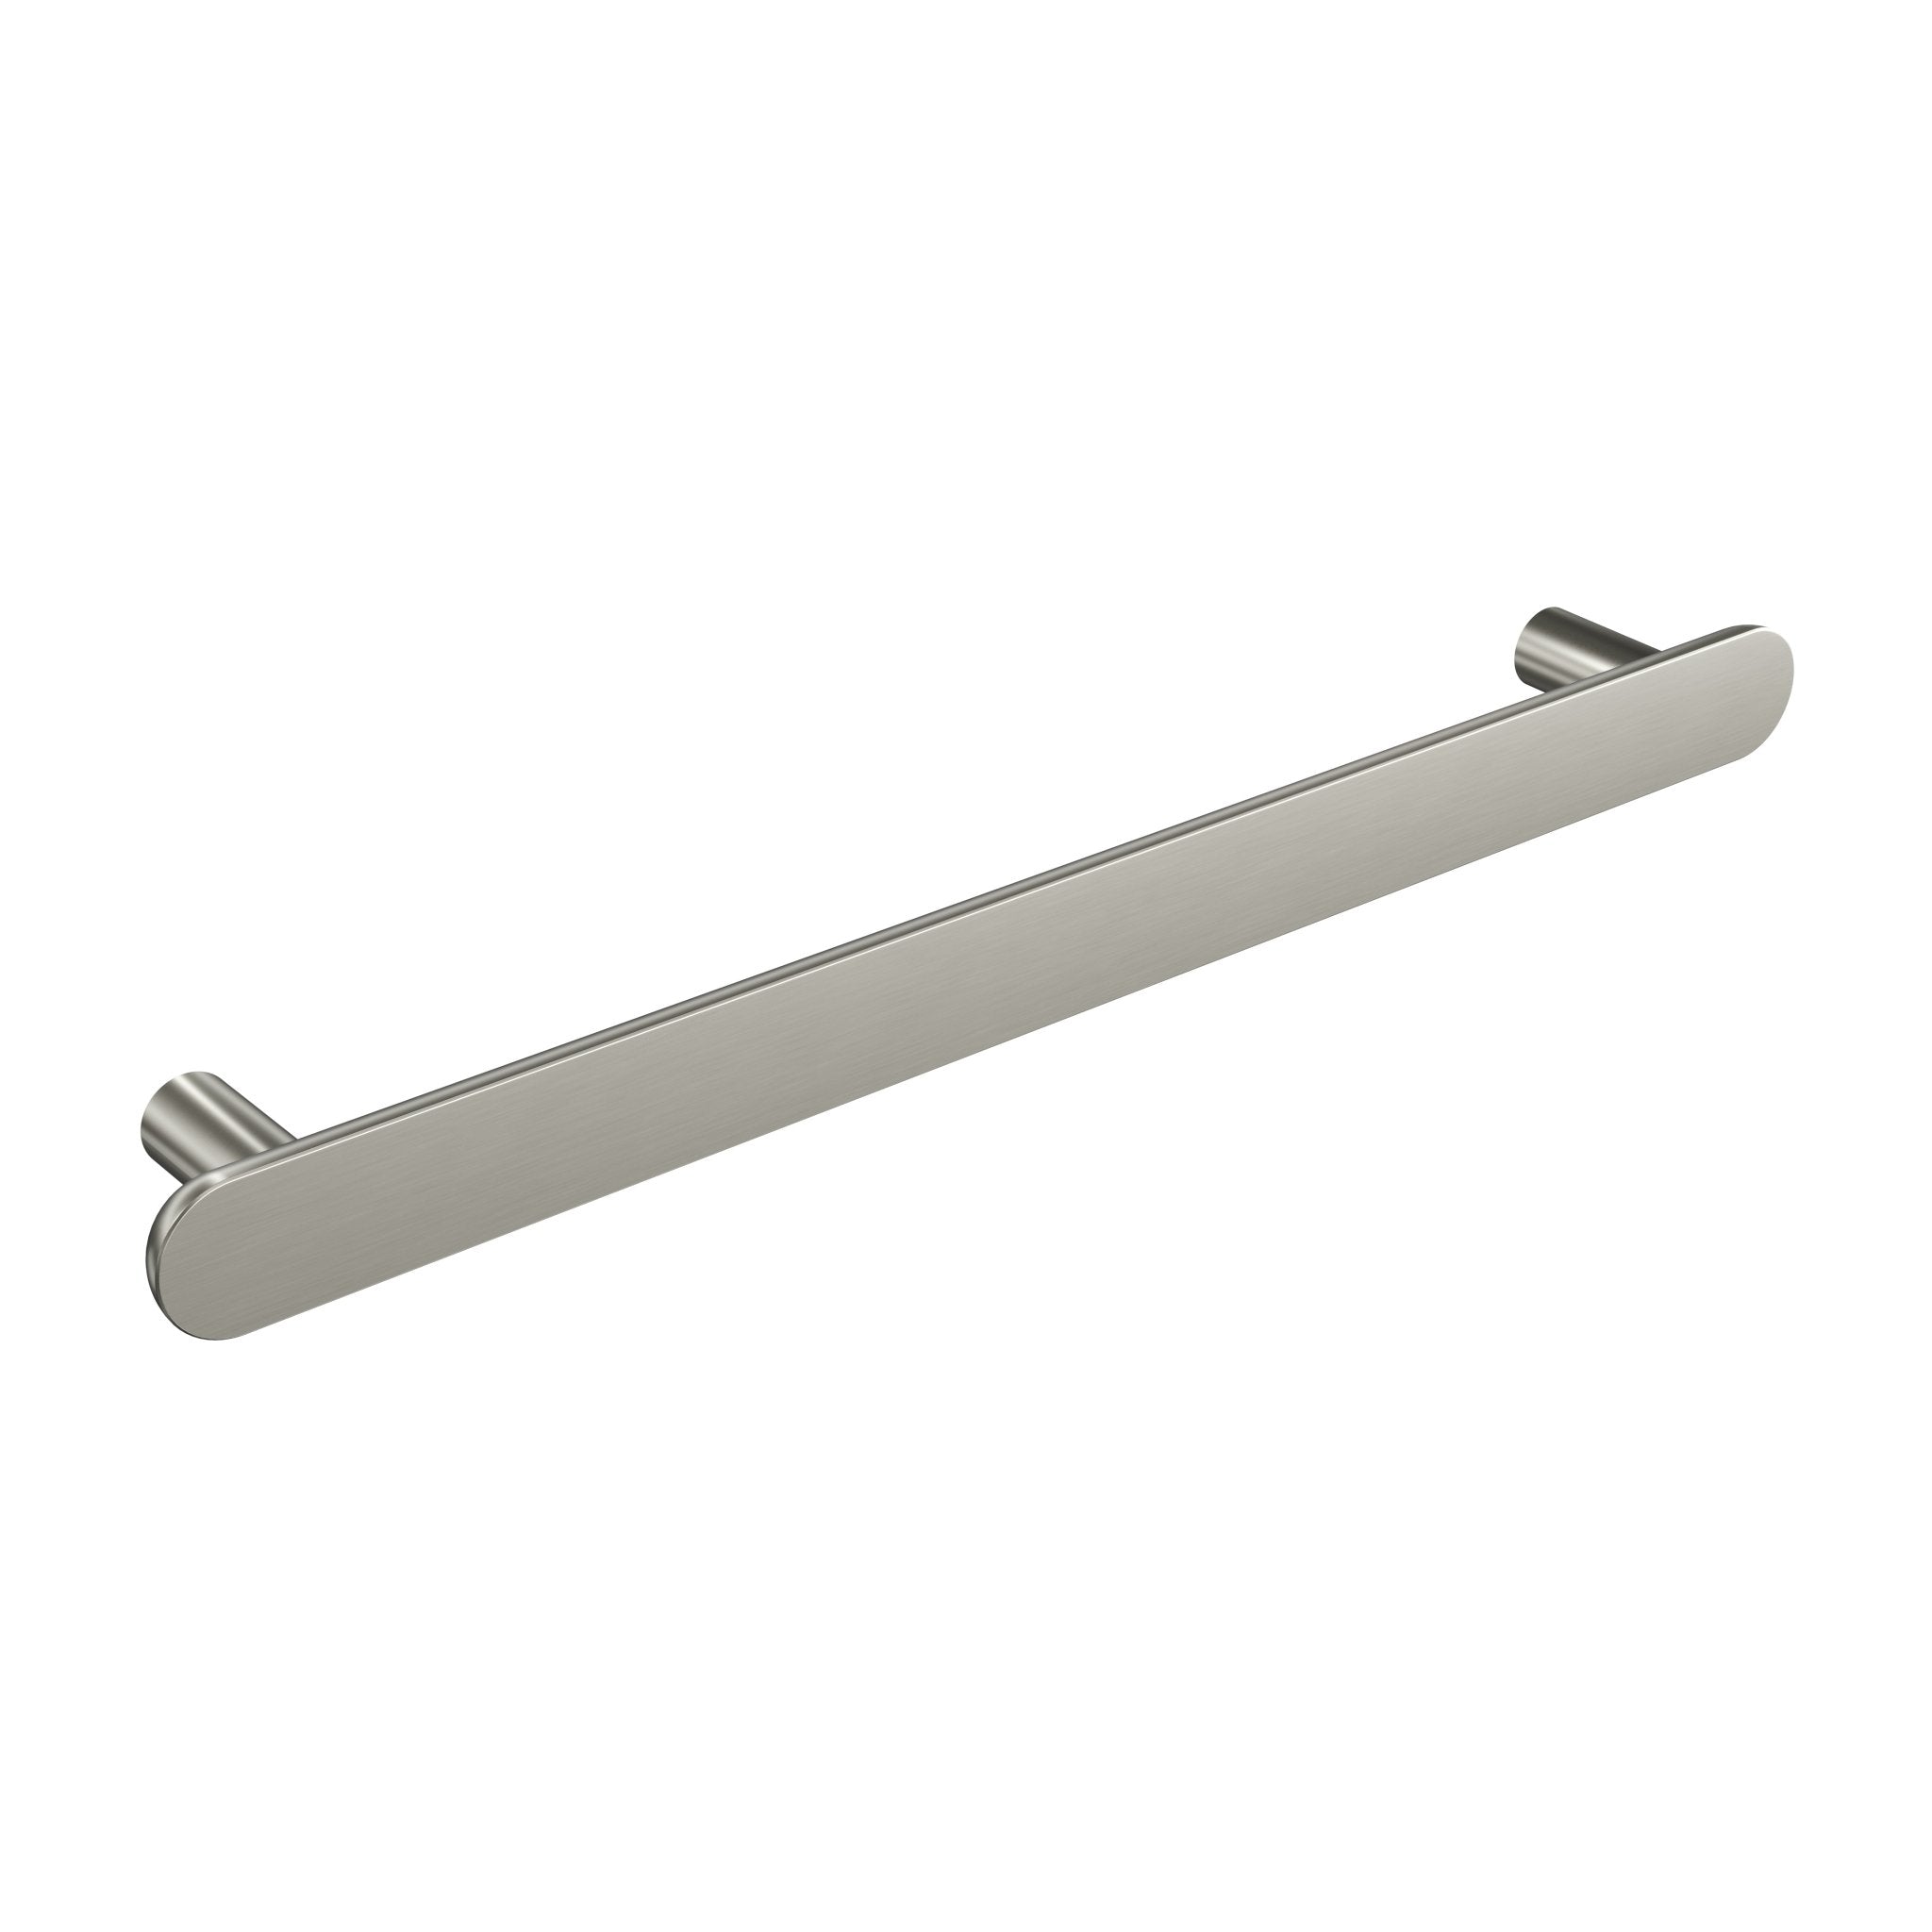 Bar Trim Pull Handle-Industrial Nickel-260mm-The Hairpin Leg Co.